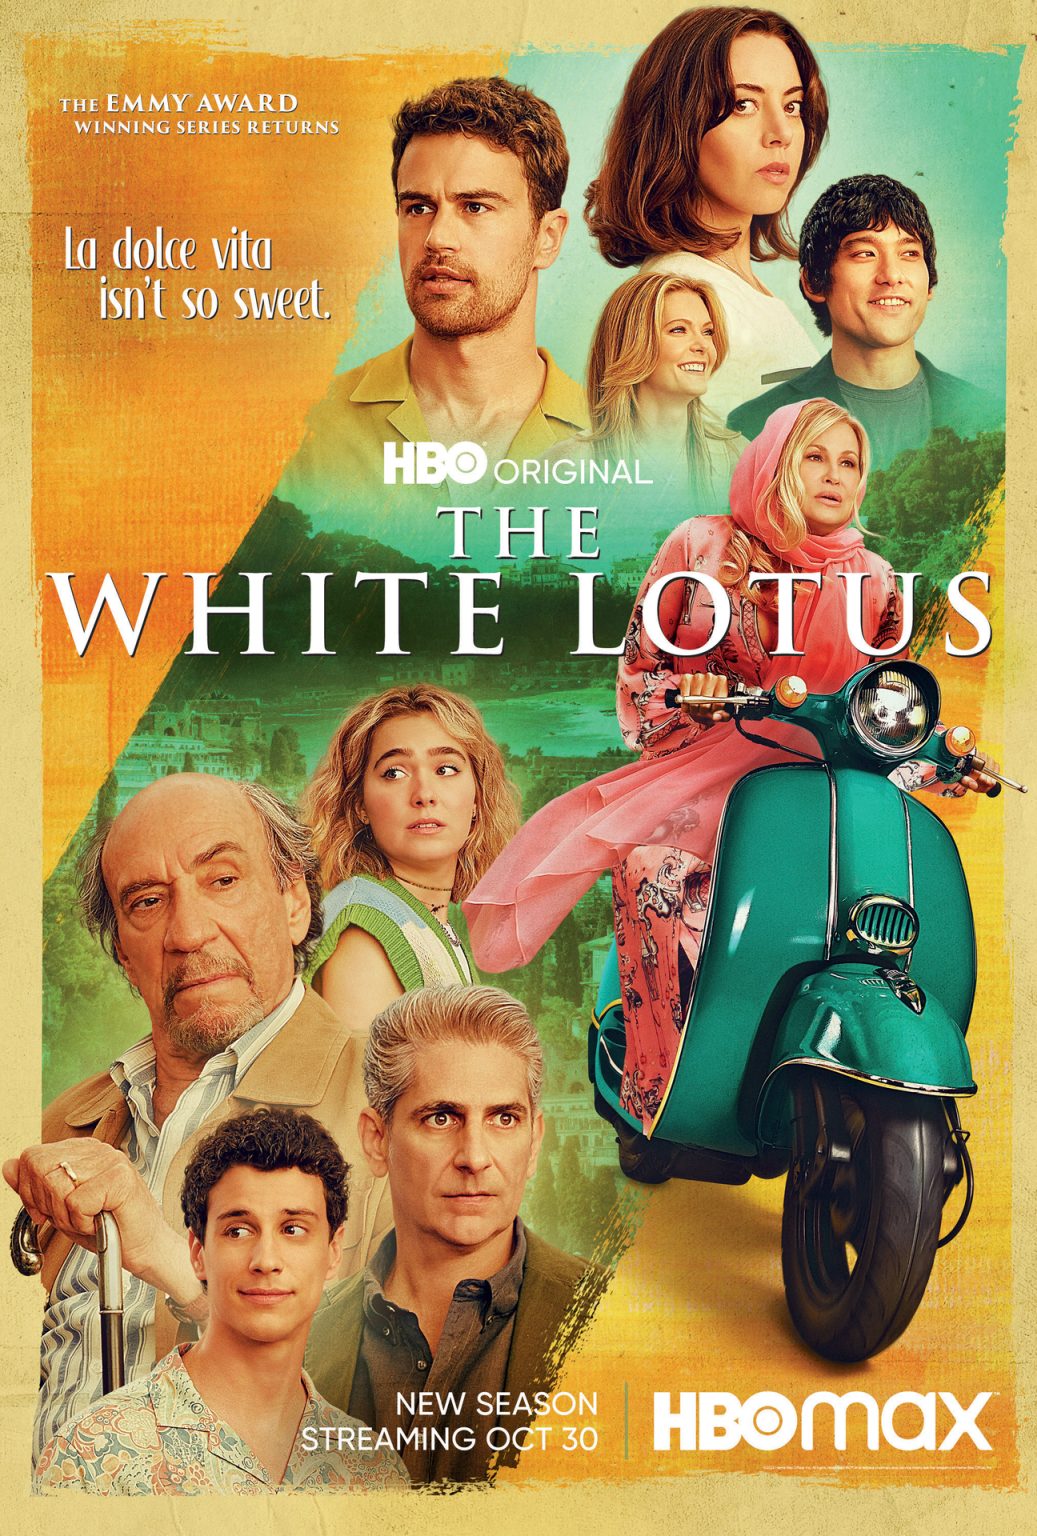 The White Lotus Gets Colorful New Poster Ahead Of Season Two Premiere